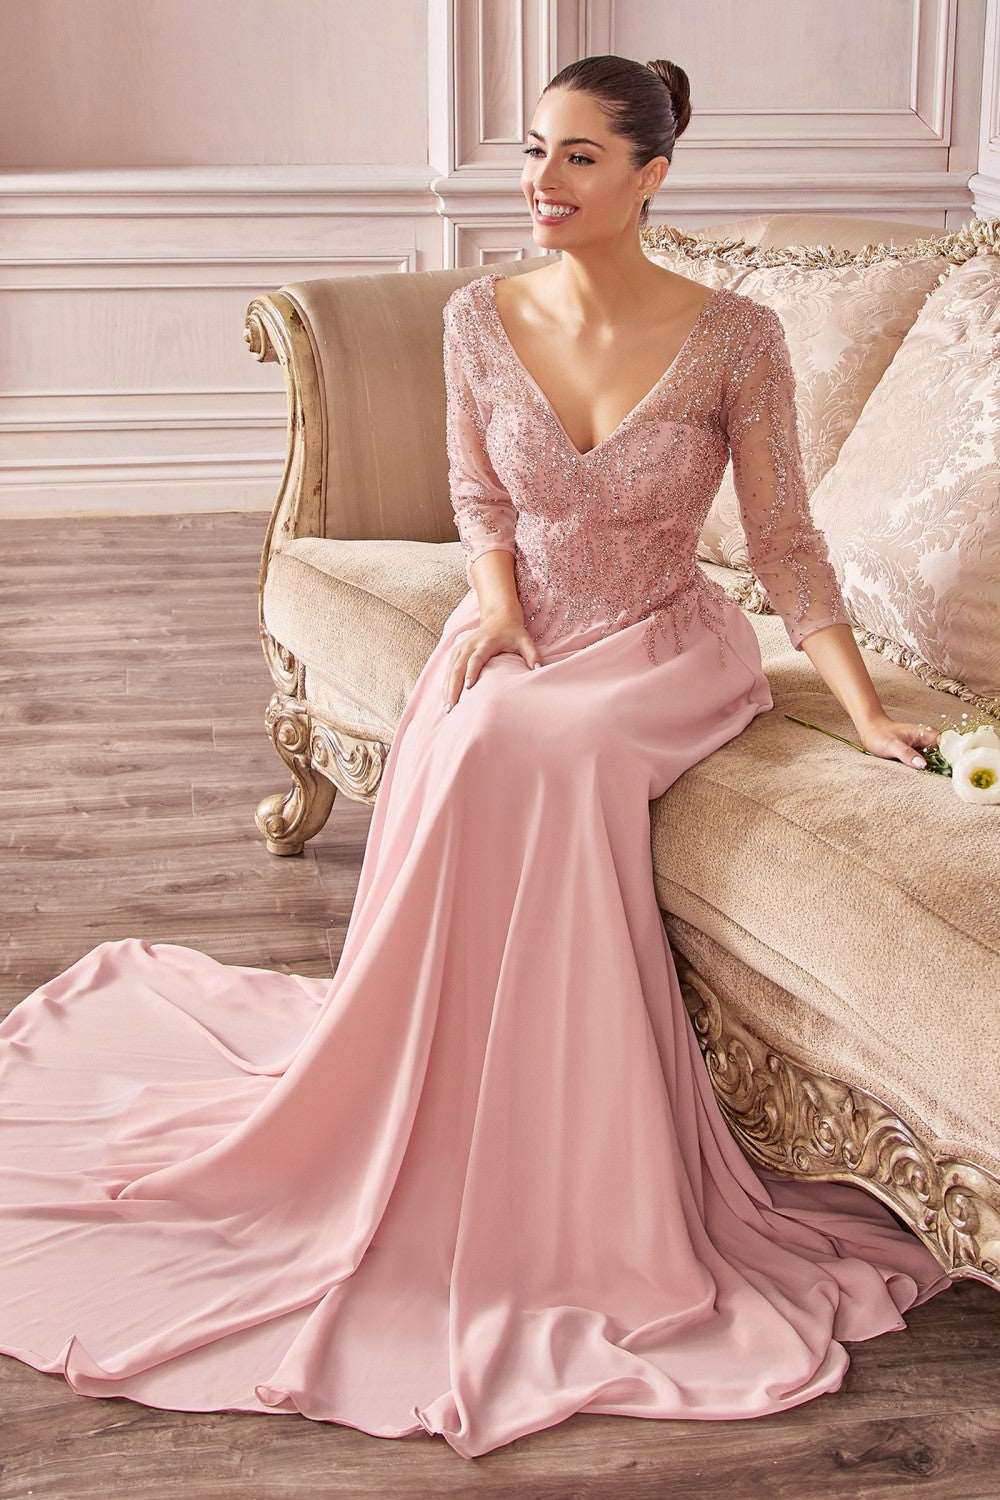 CD CD0171 - Flowy Chiffon A-Line Formal Gown with Sheer Sleeves & Bead Embellished V-Neck Bodice PROM GOWN Cinderella Divine M DUSTY ROSE 